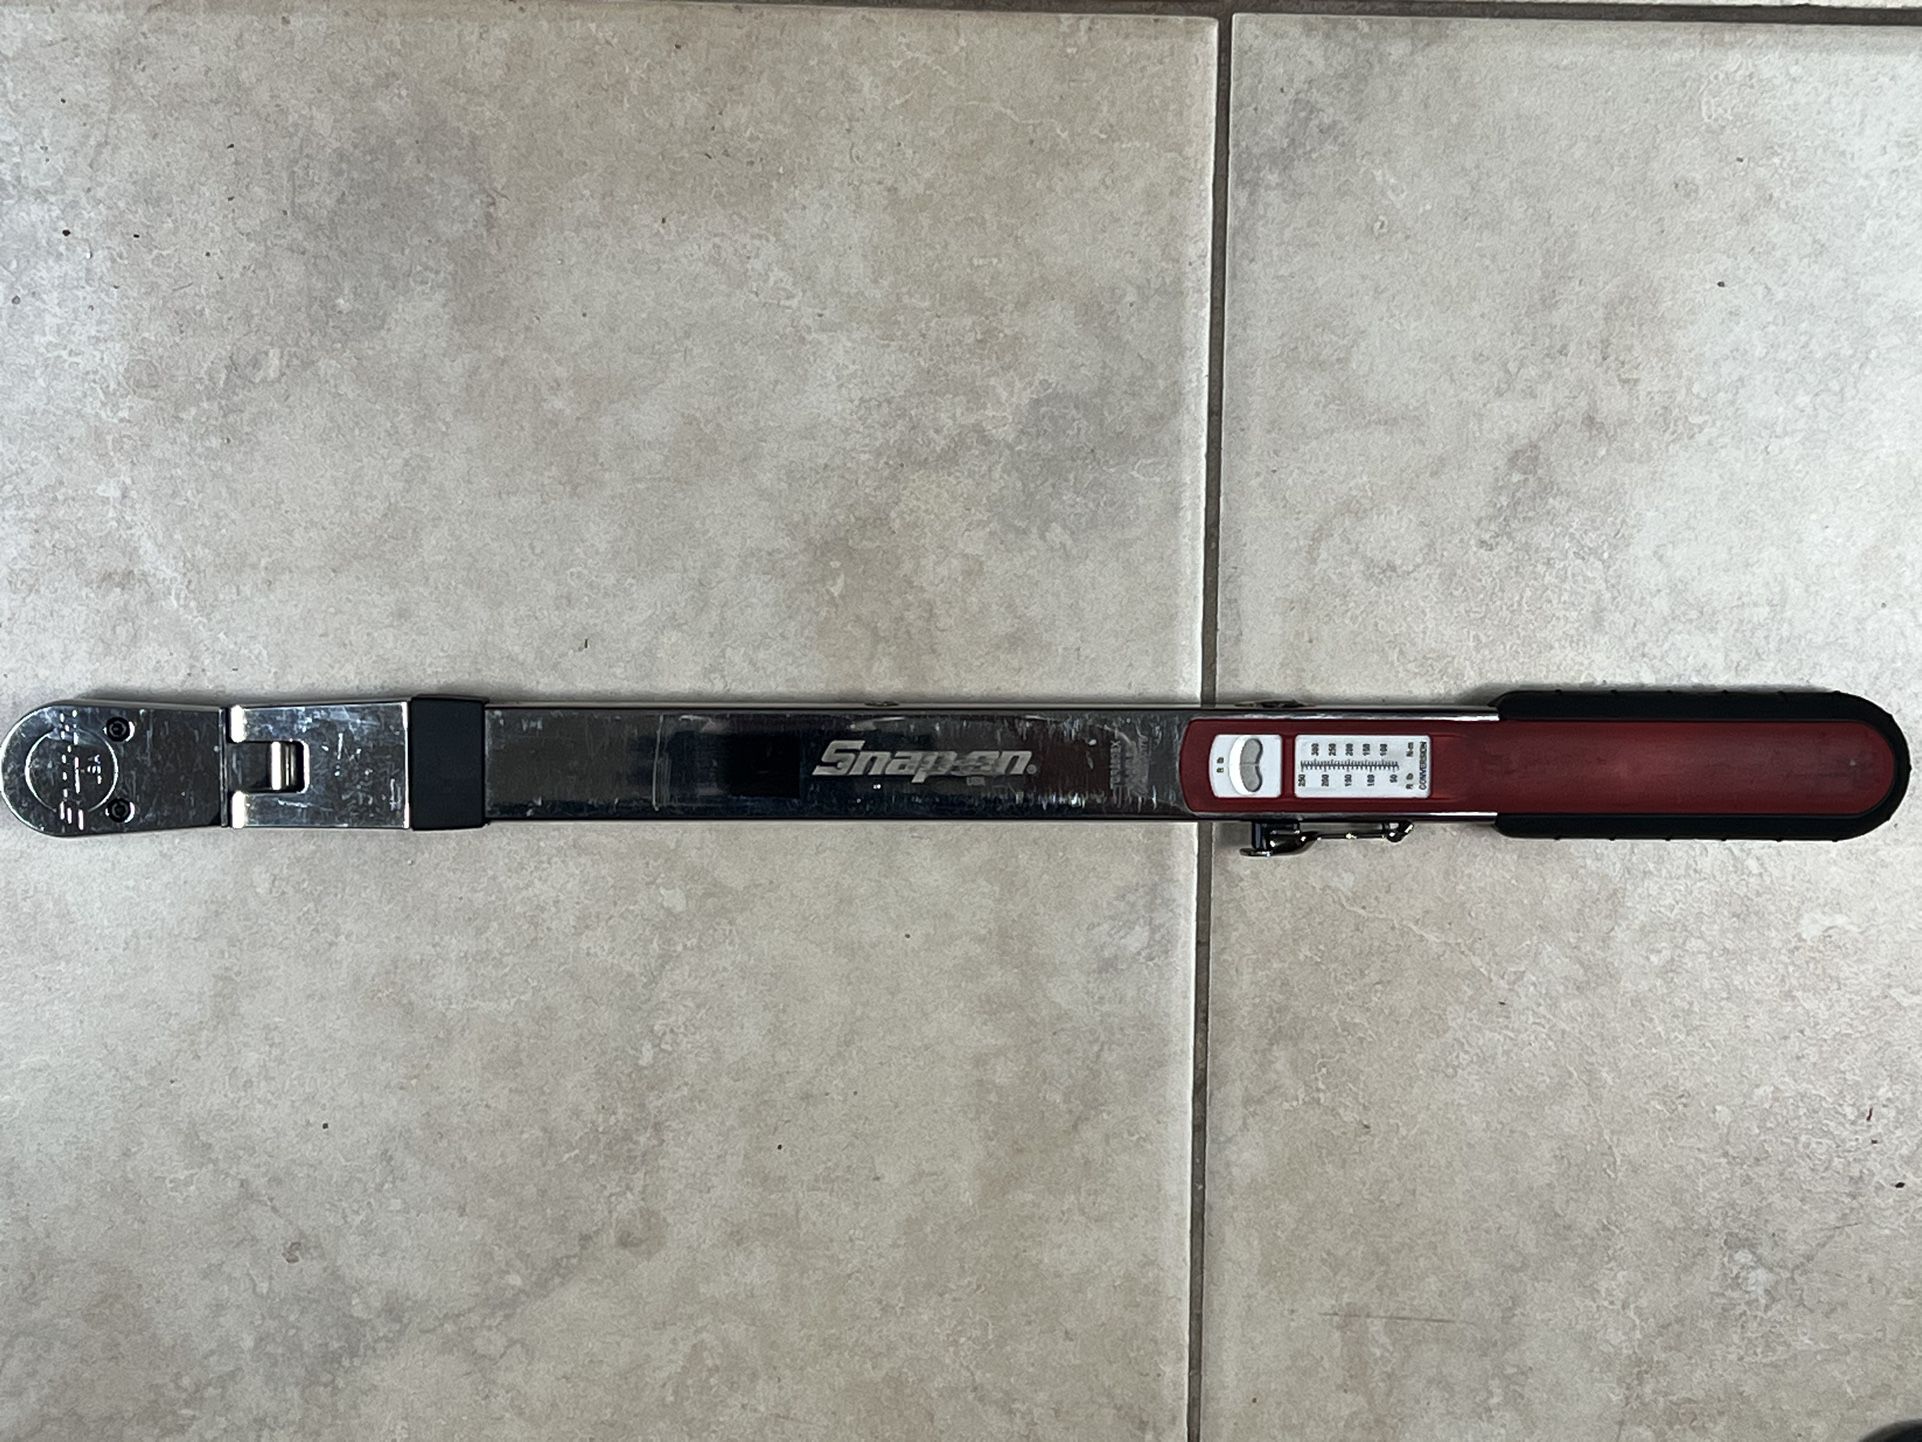 Snap On Torque Wrench 1/2” 40-250 Ftlbs